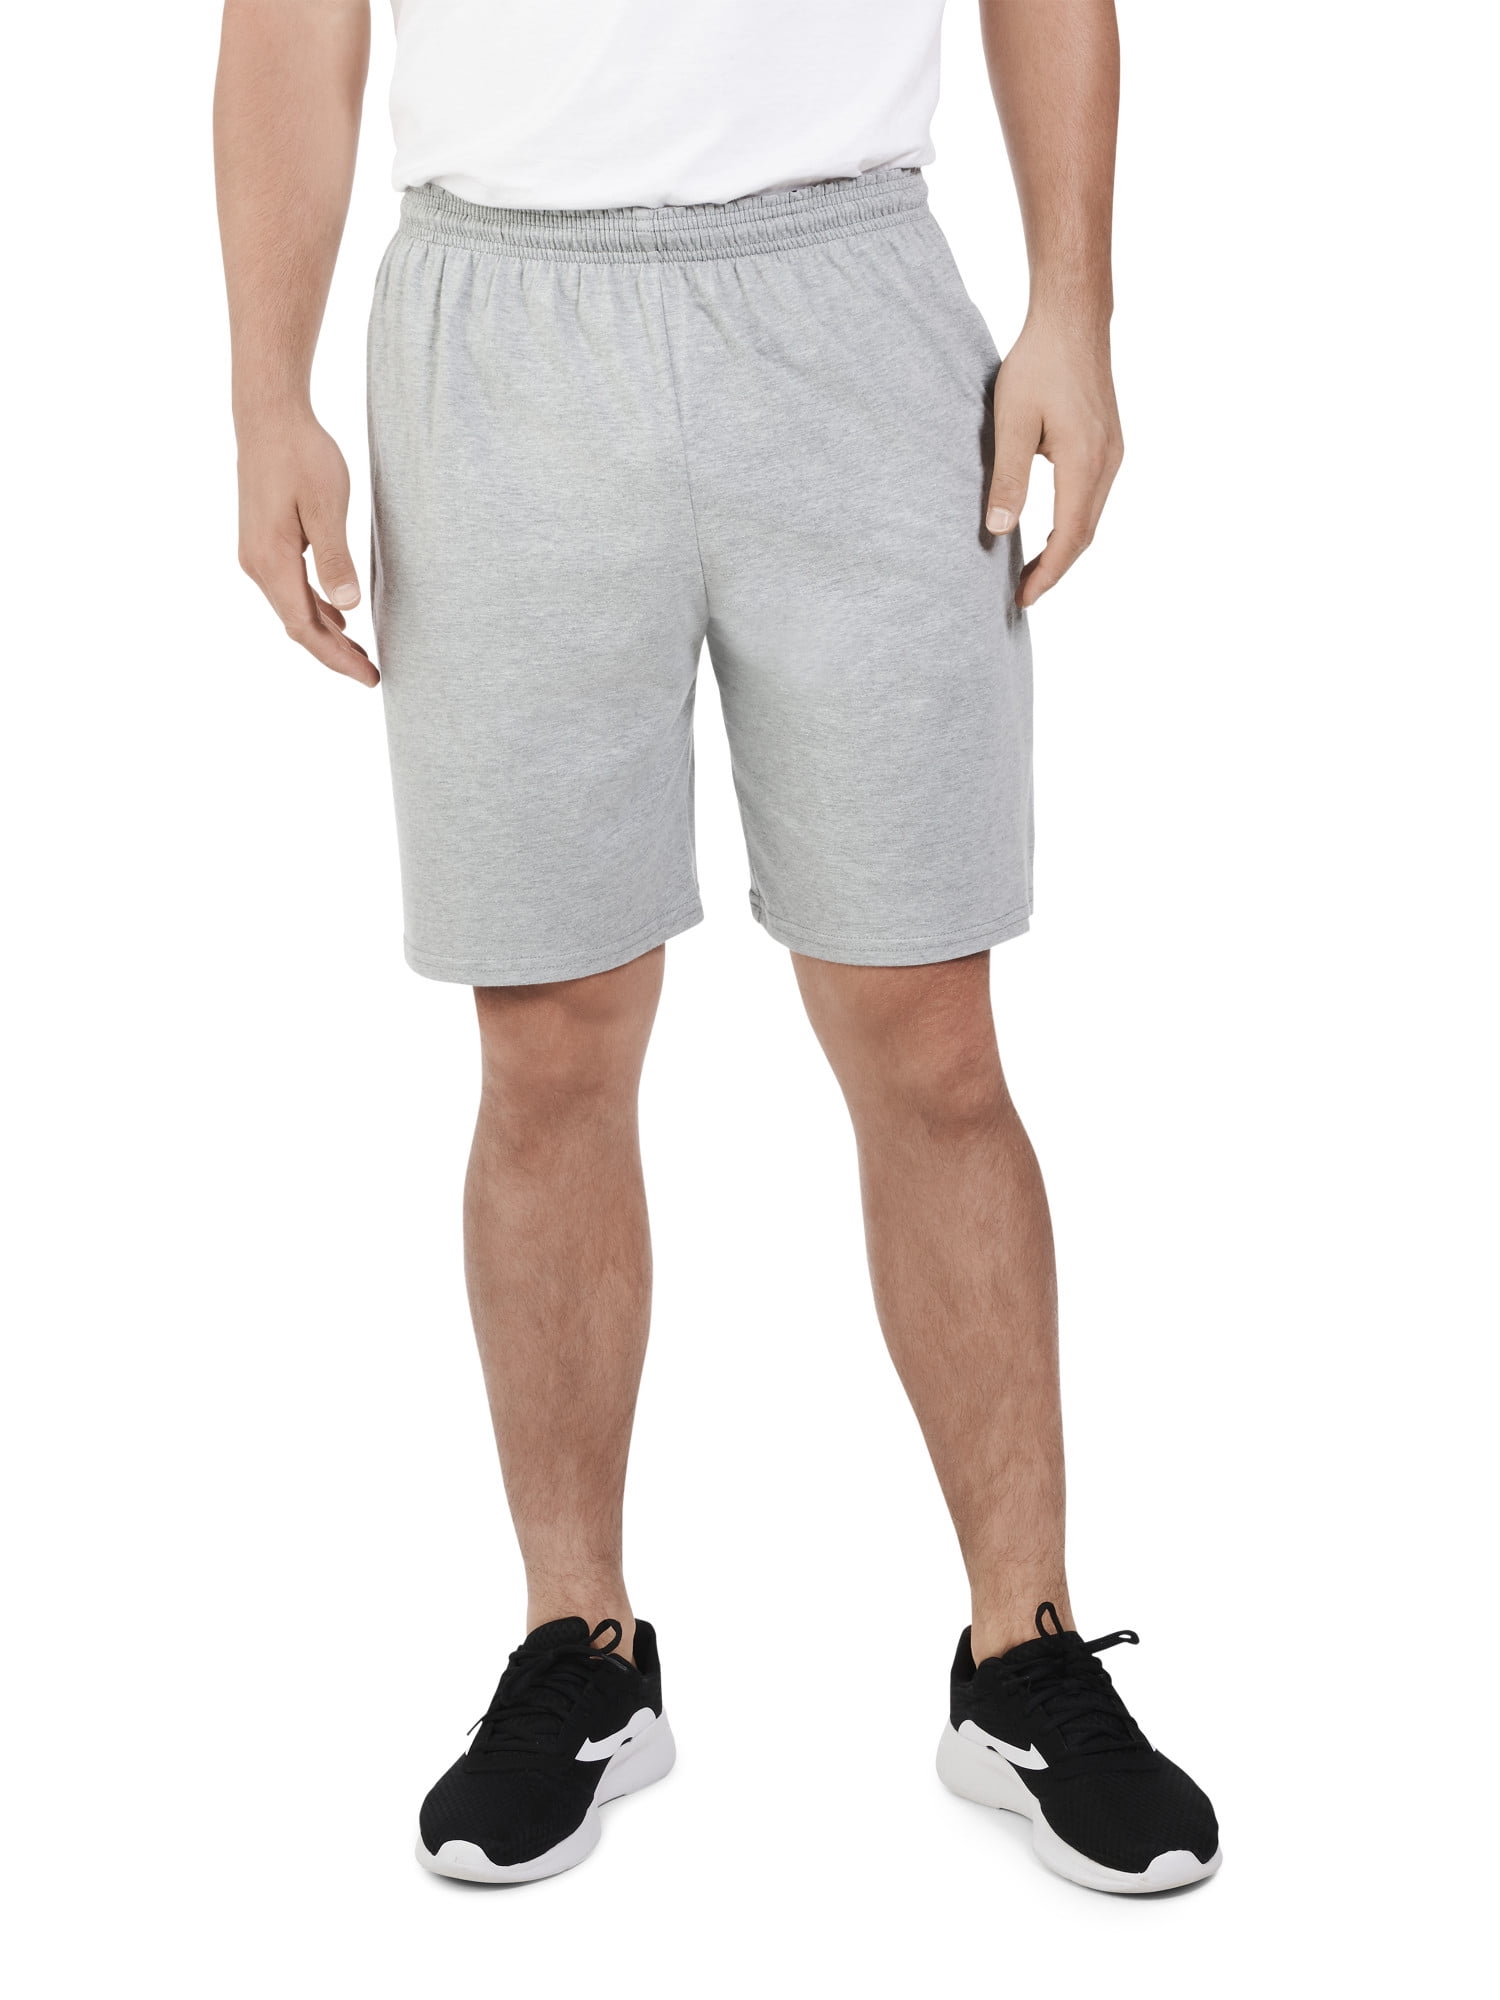 fruit of the loom jersey shorts